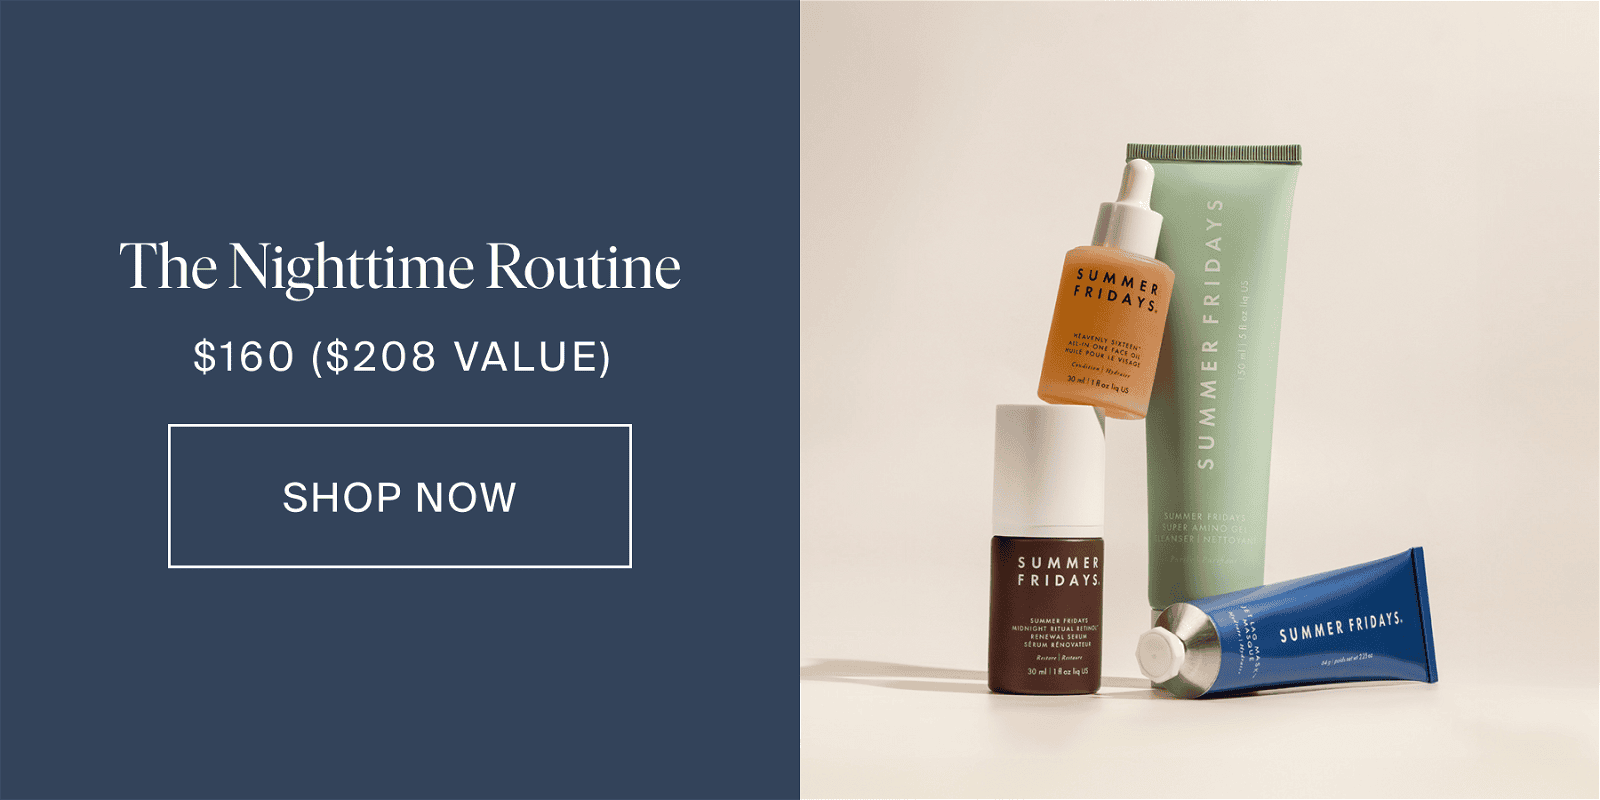 The Nighttime Routine